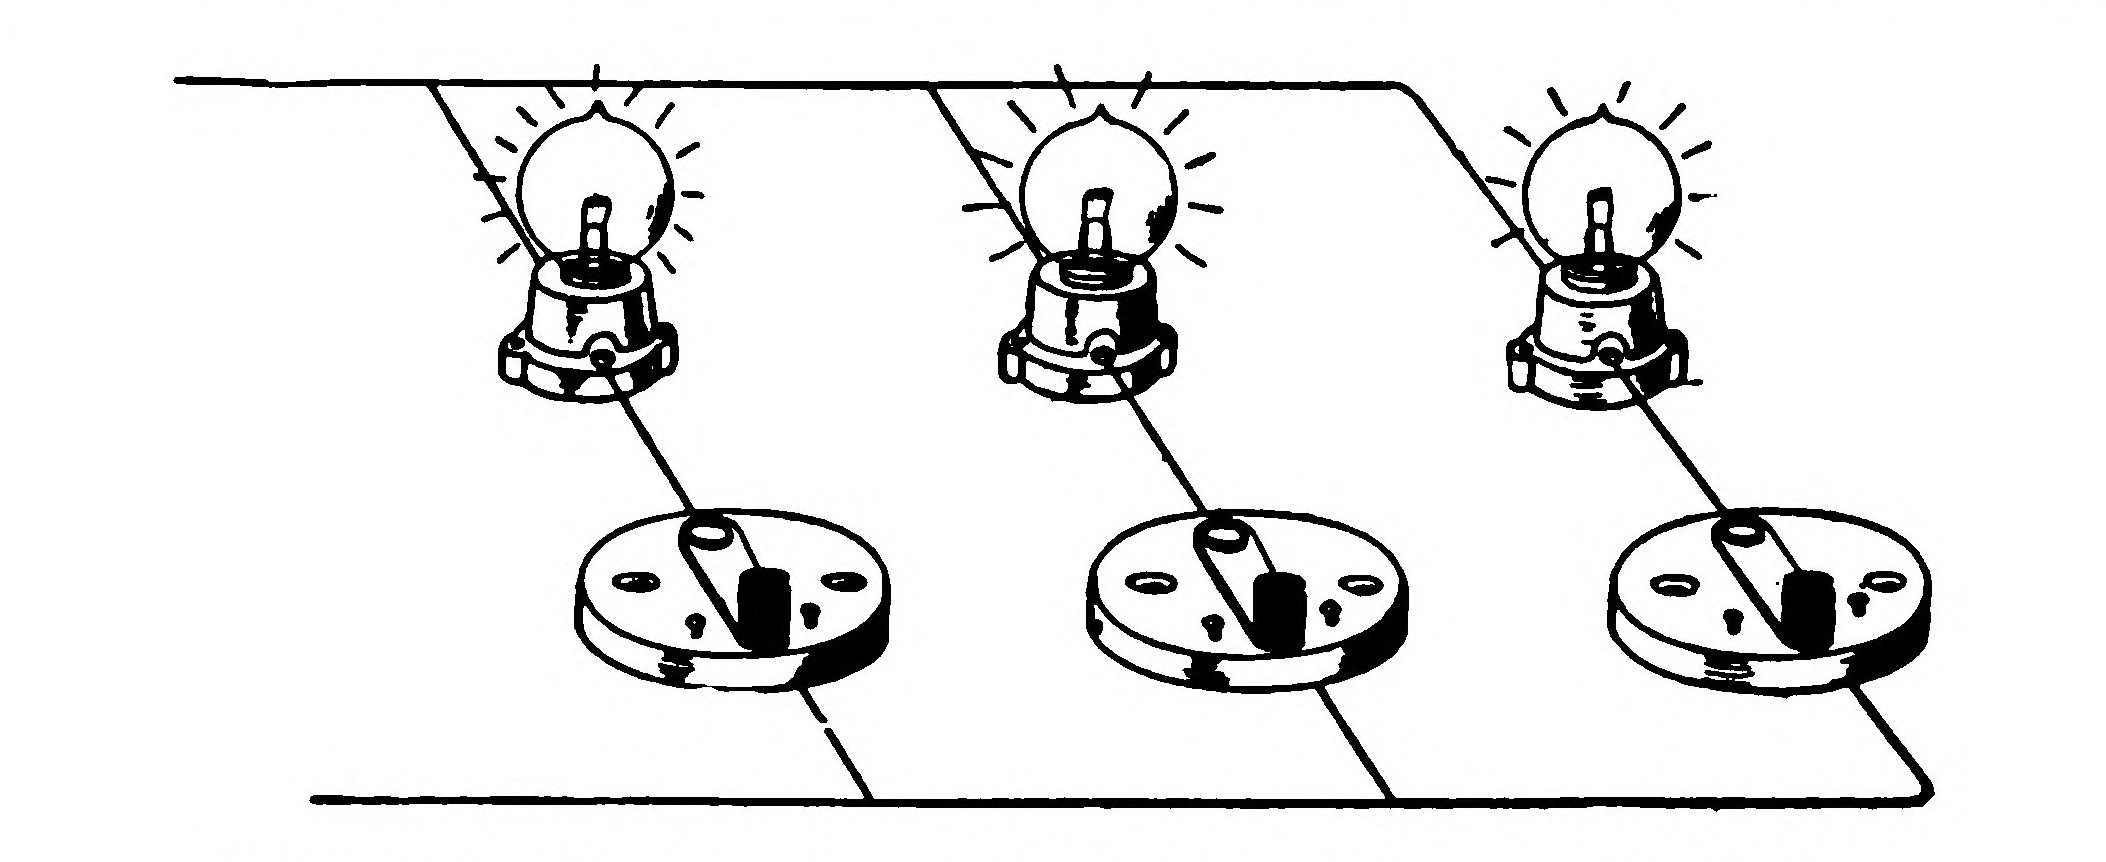 FIG. 160.—Lamps Controlled by Separate switches.